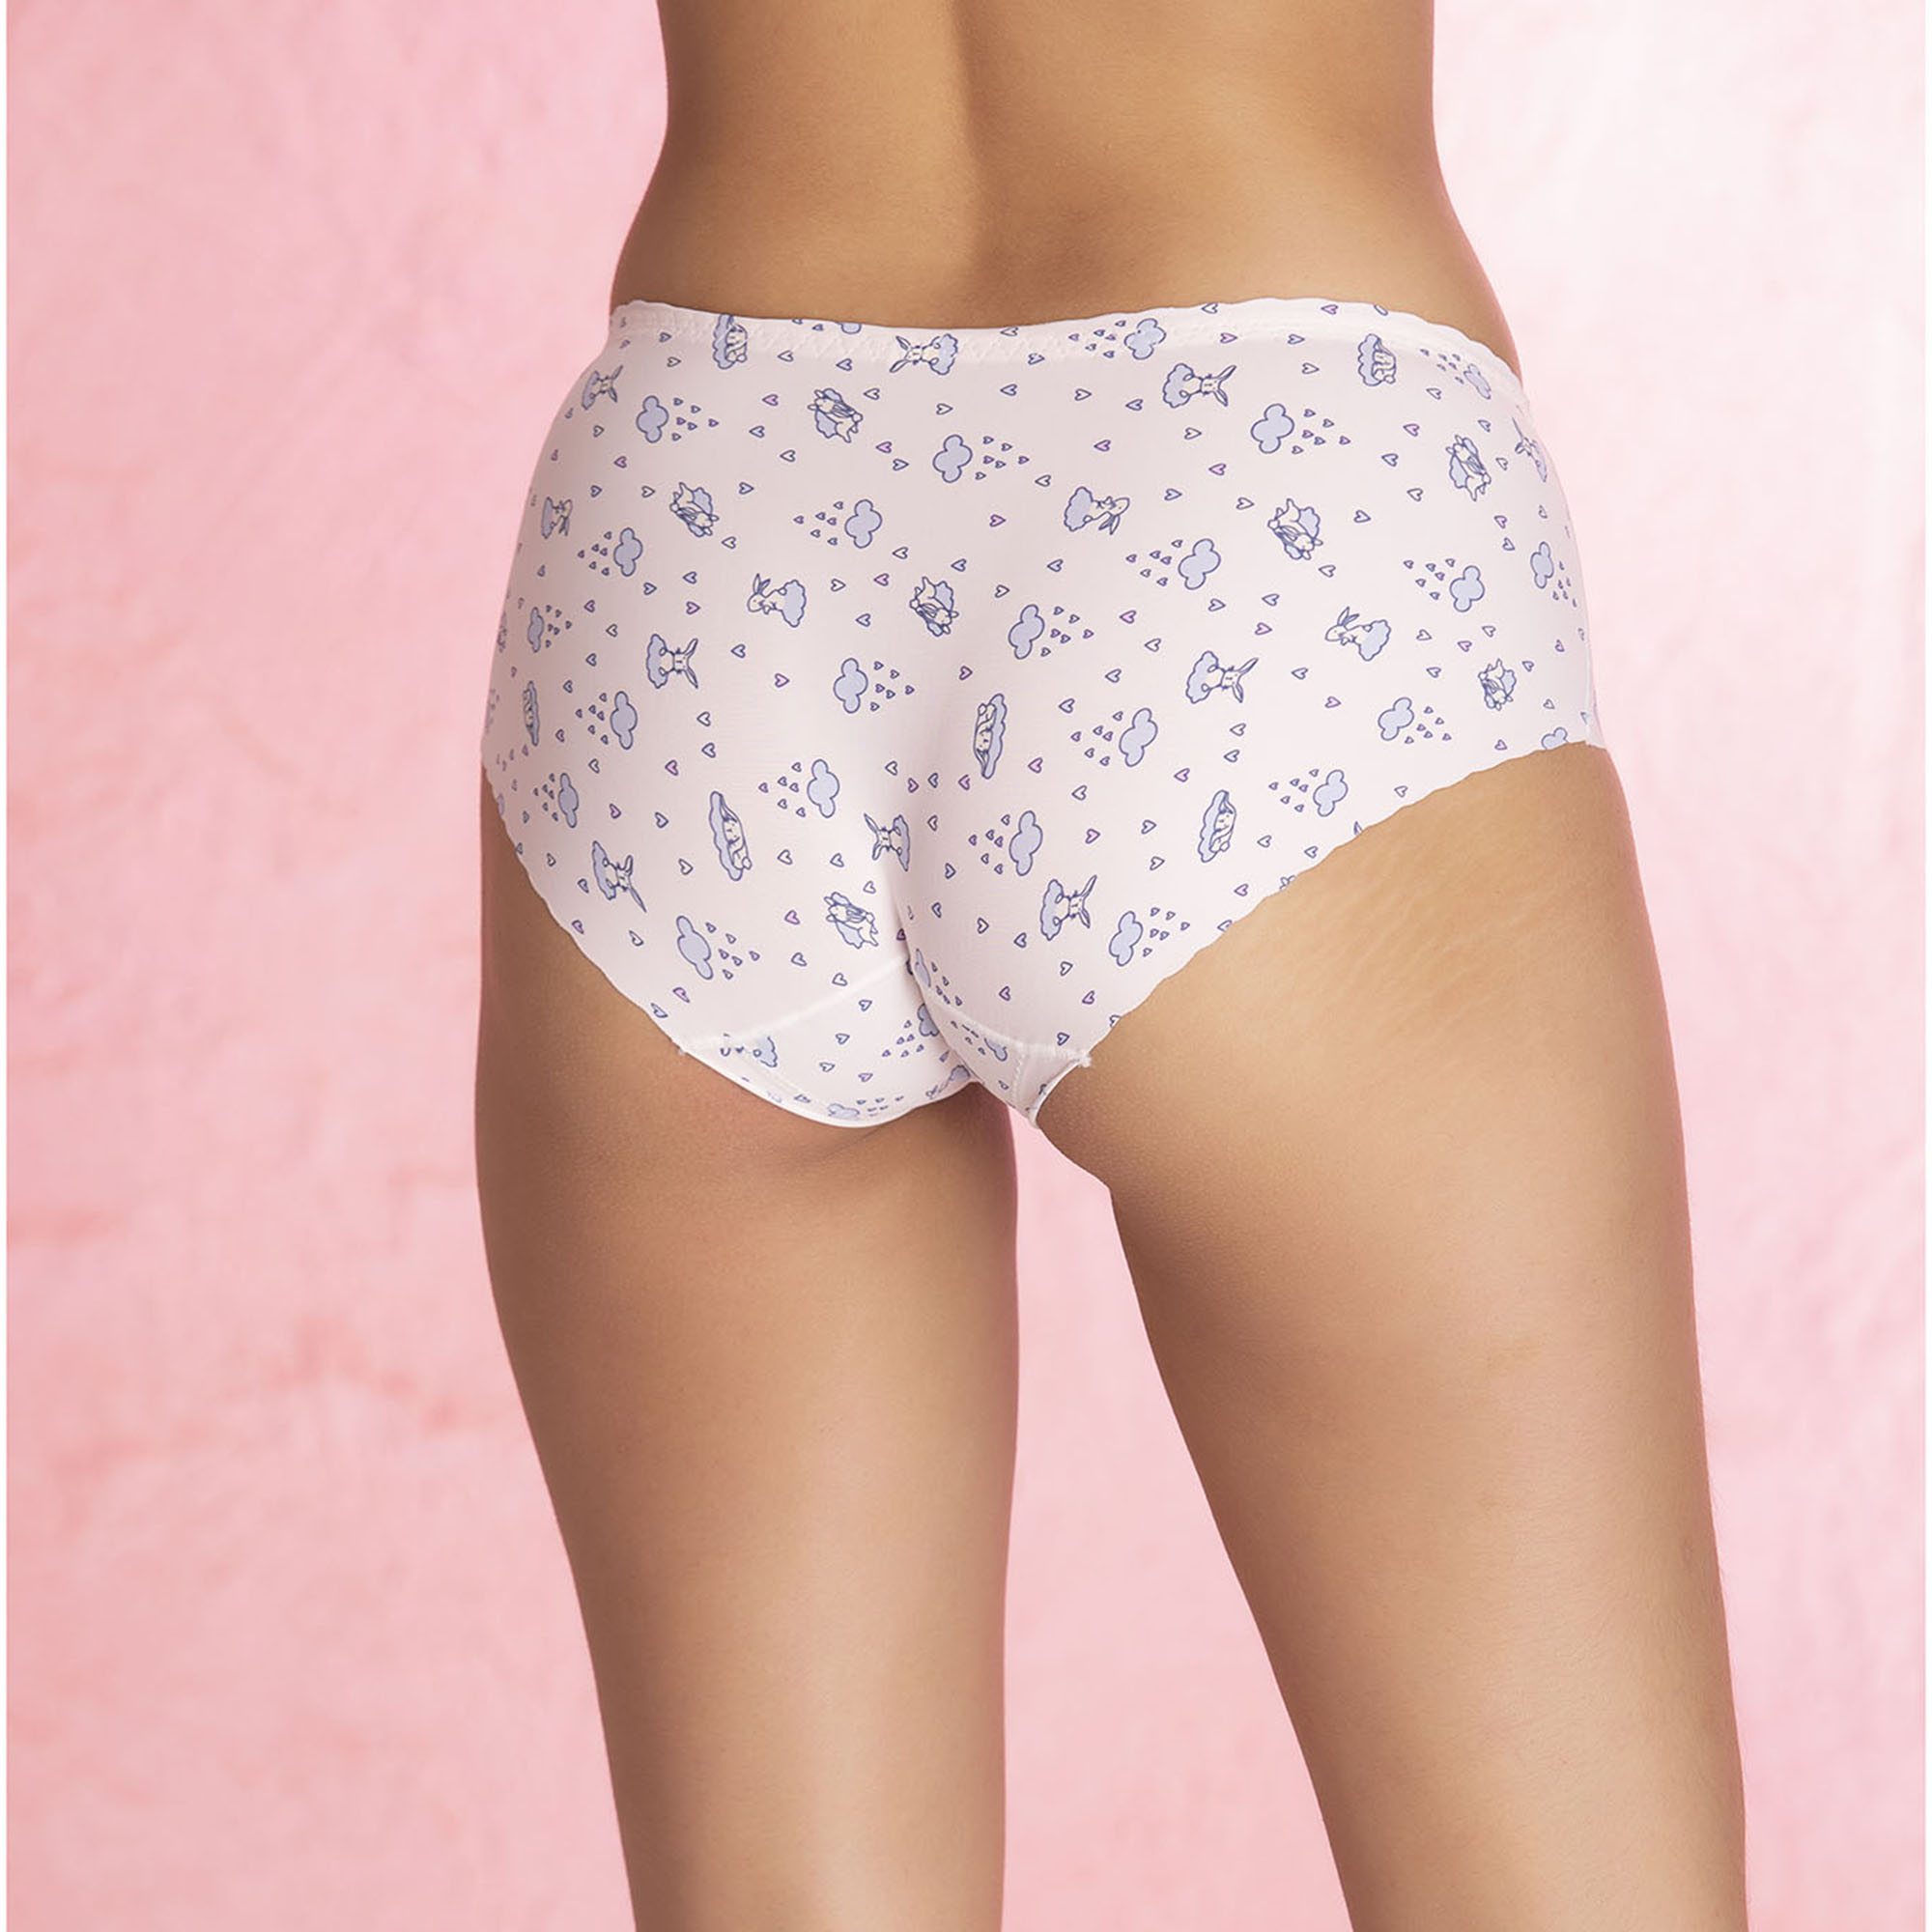 Ultra-smooth soft fabric No visible panty lines with special